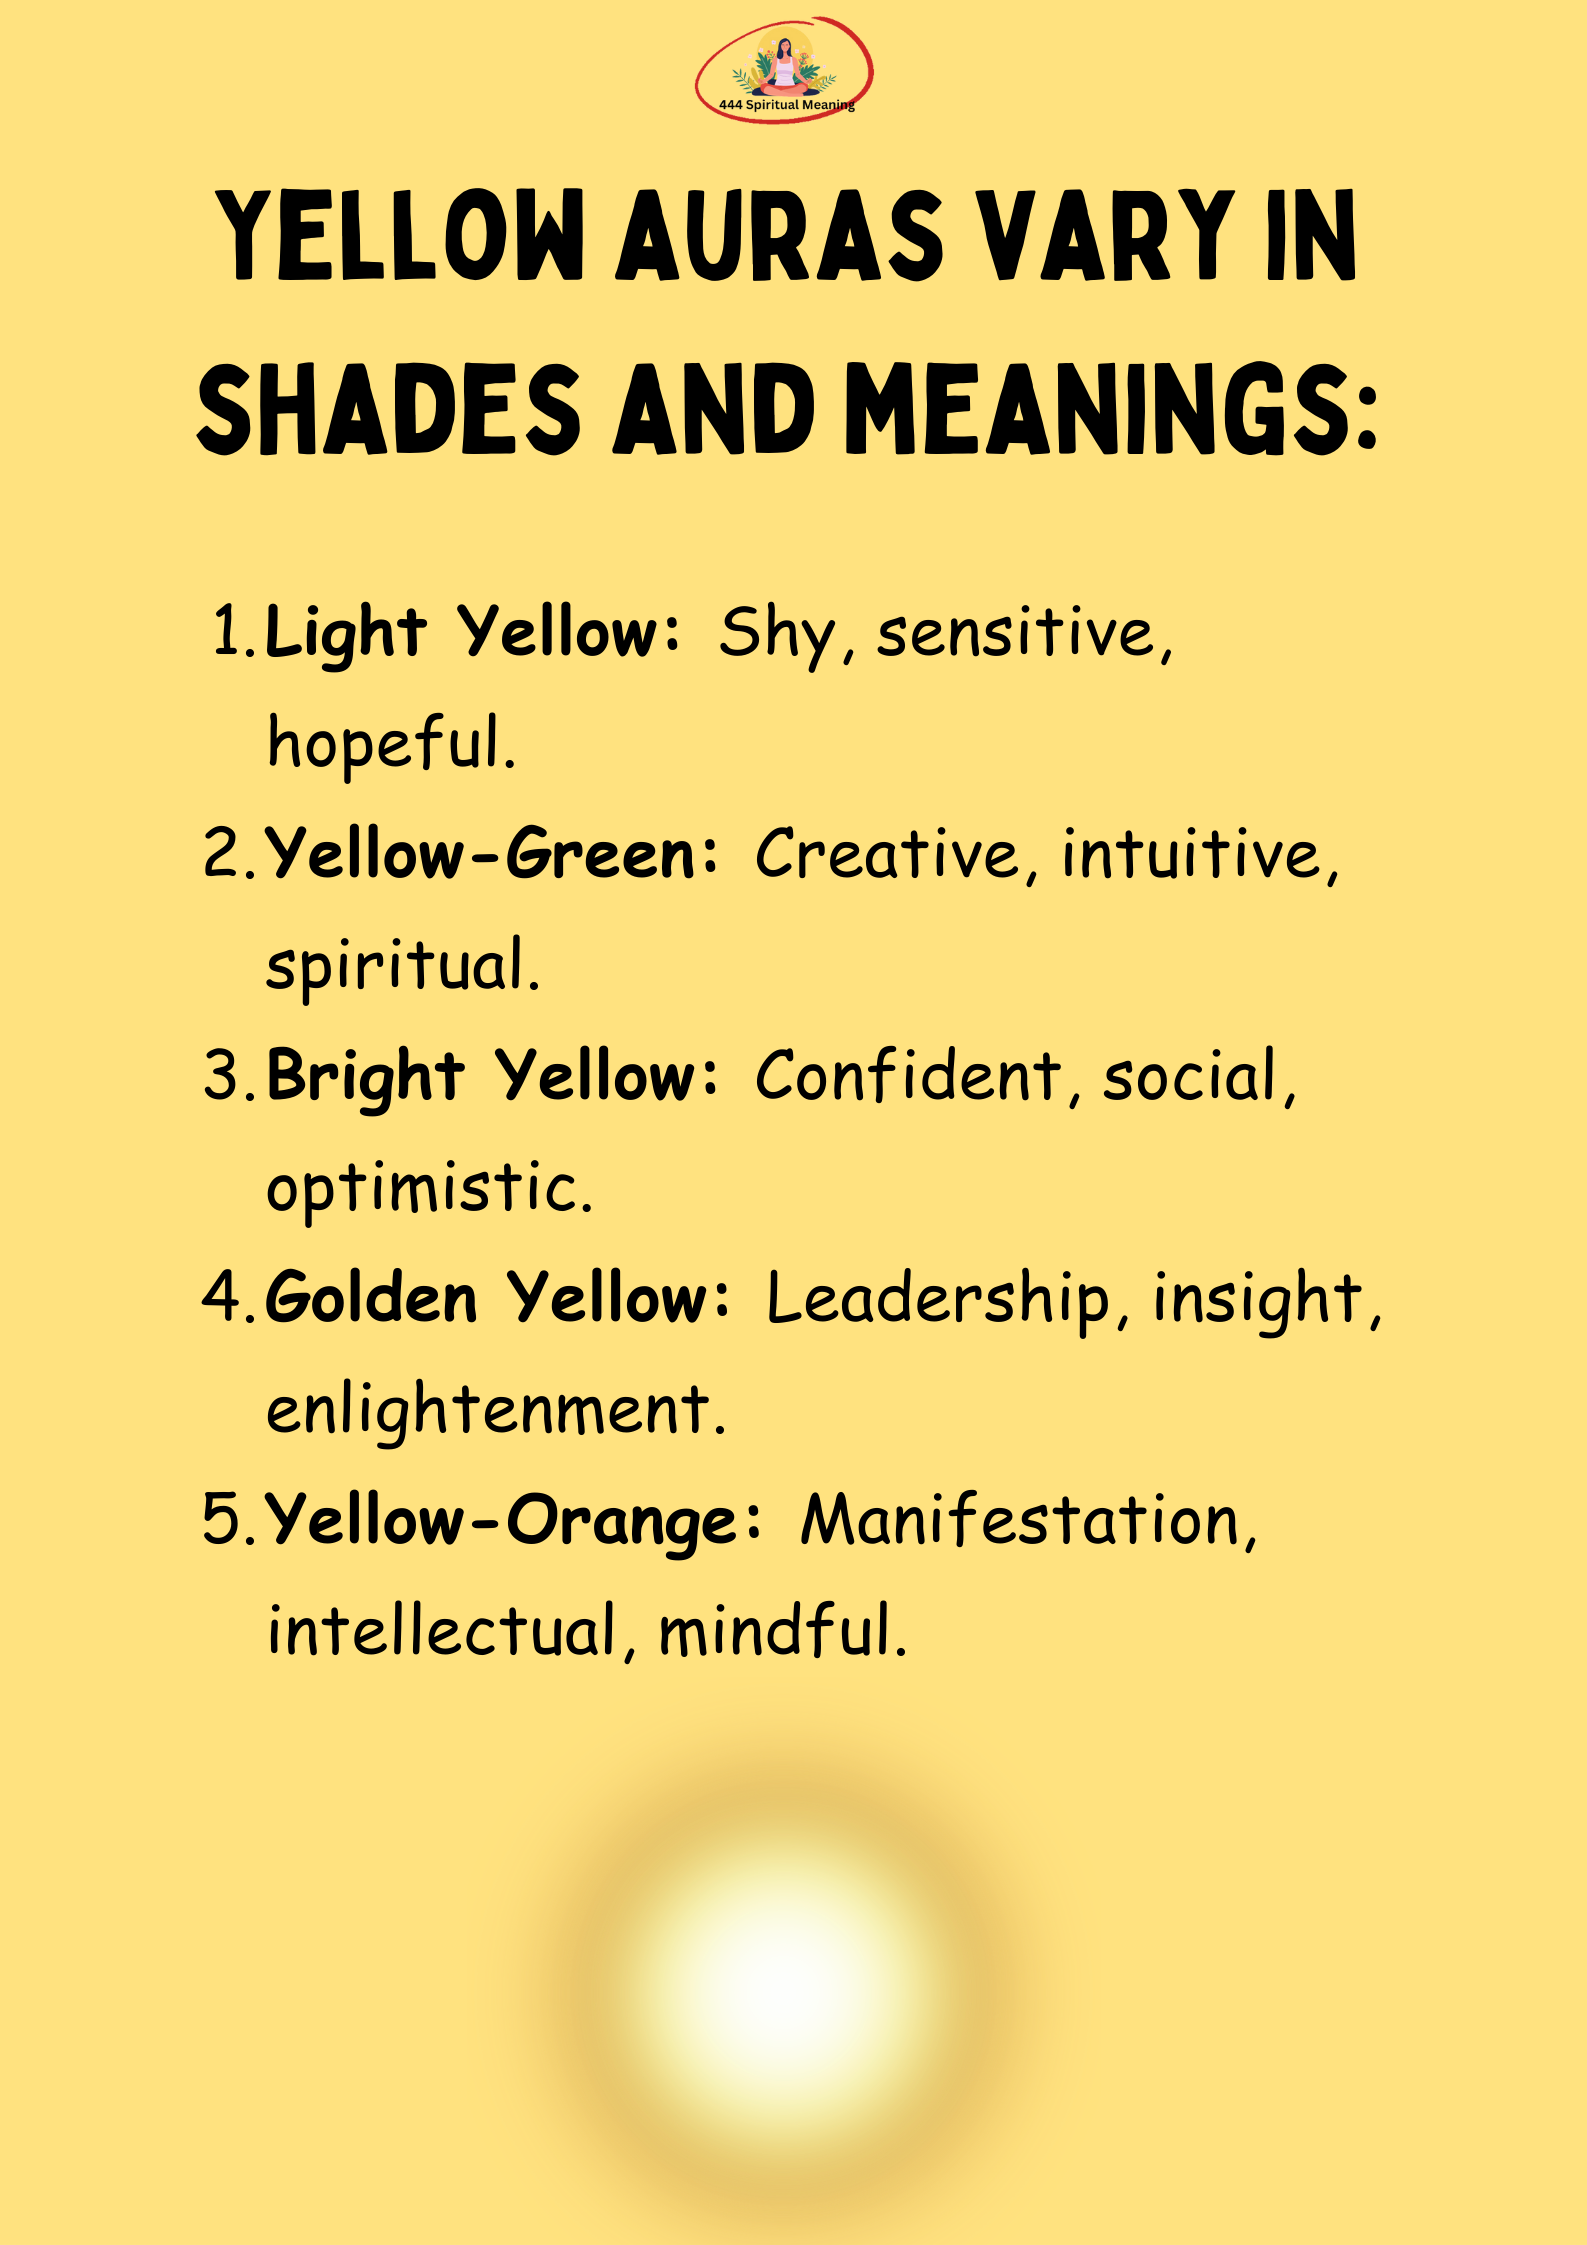 Yellow auras vary in shades and meanings: